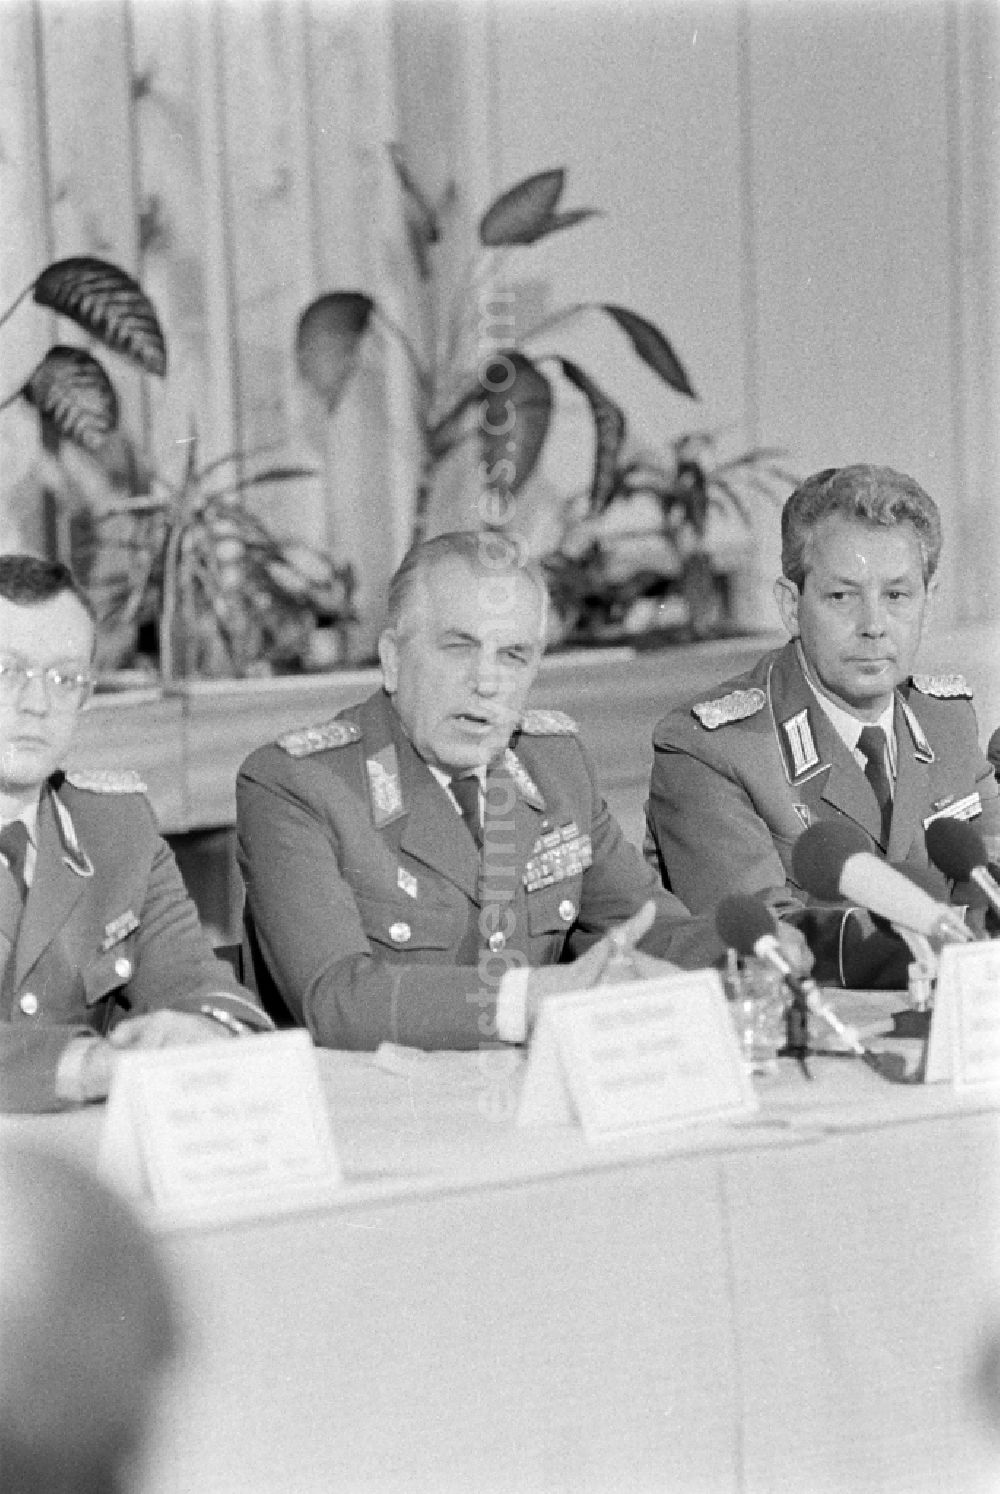 GDR photo archive: Goldberg - Press conference with Major General Horst Stechbarth and soldiers and officers of Panzer Regiment 8 (PR-8) on the occasion of the ceremonial and media-effective dissolution of the troop unit on the grounds of the Artur Becker barracks in Goldberg in the state of Mecklenburg-Western Pomerania in the area of the former GDR, German Democratic Republic